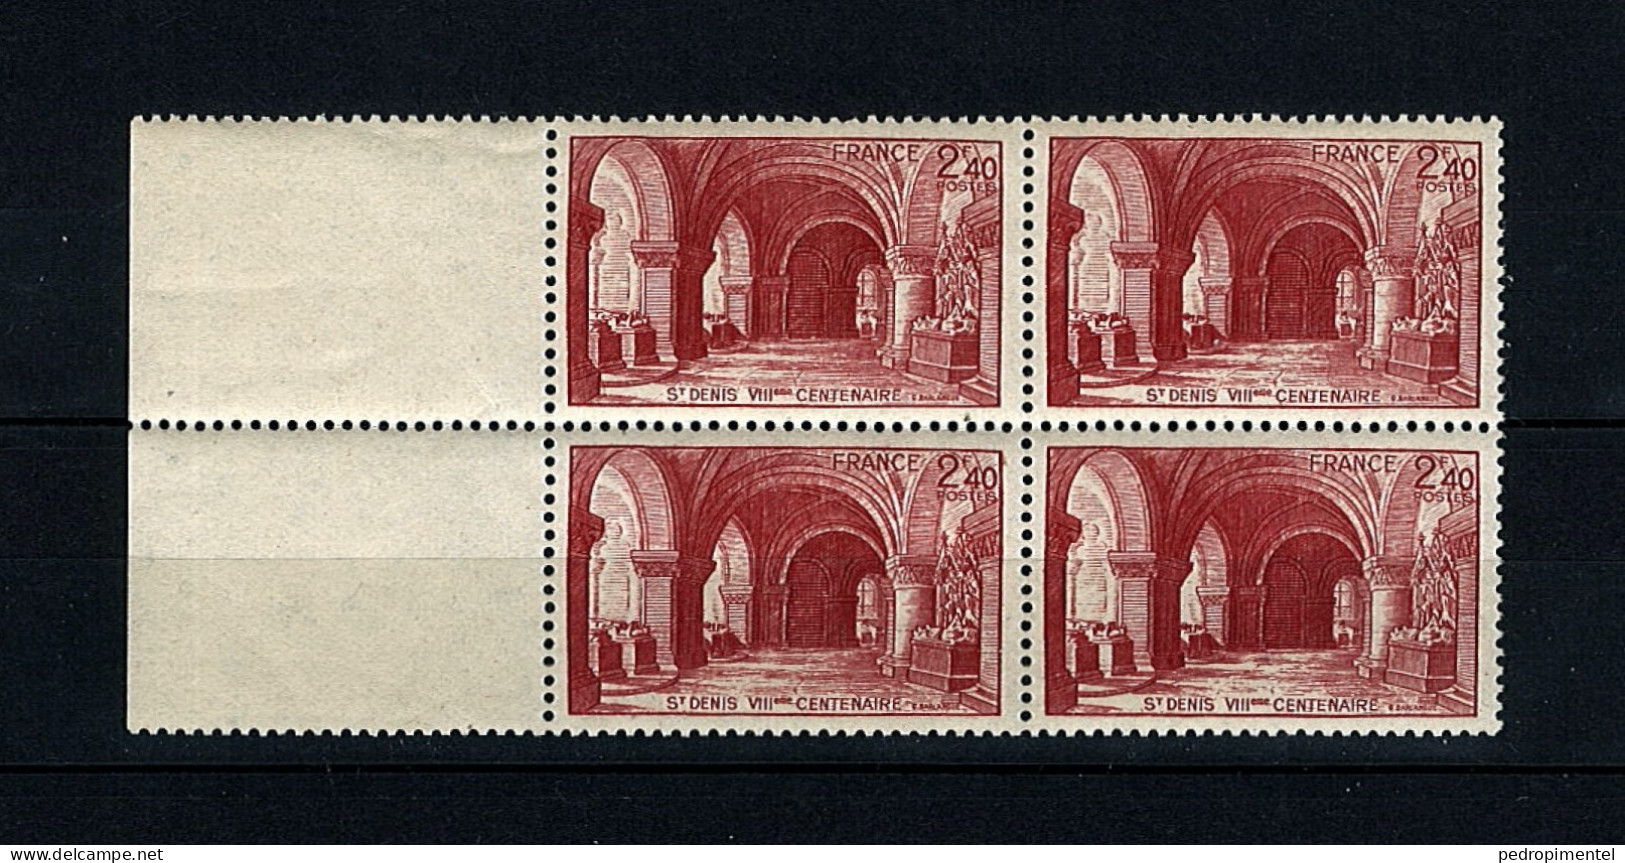 France Stamps | 1944 | The 800th Anniversay Of St Denis  | MNH #648 - Unused Stamps